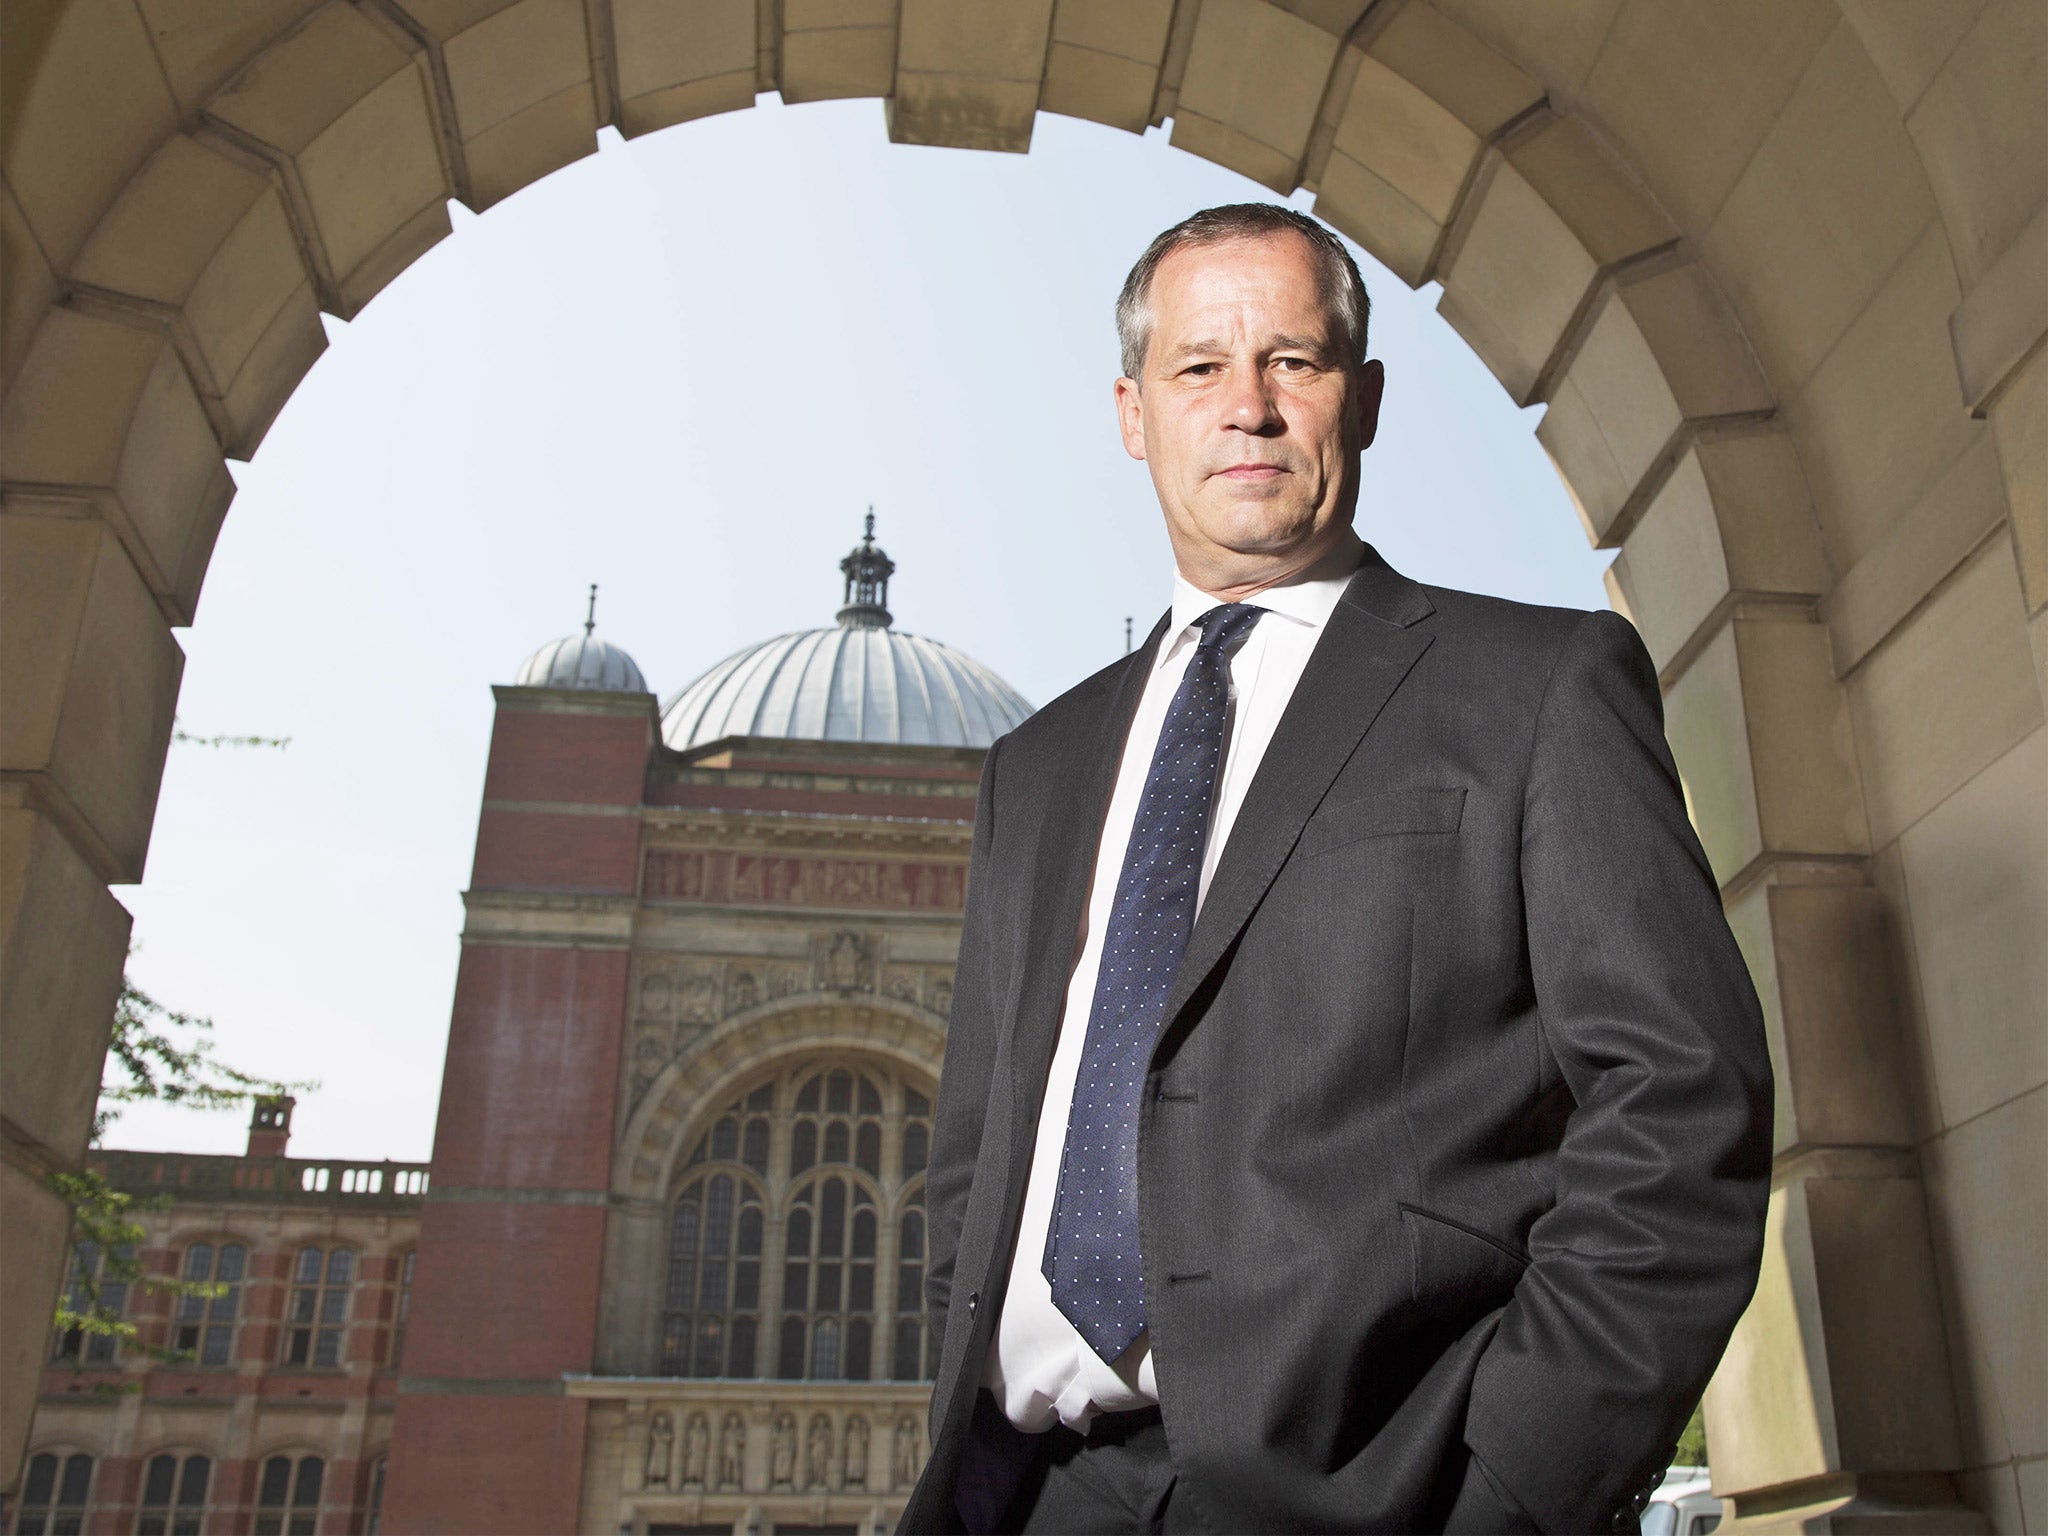 Michael Roden, head of University of Birmingham School, has already received 951 applications for next year’s 150 places